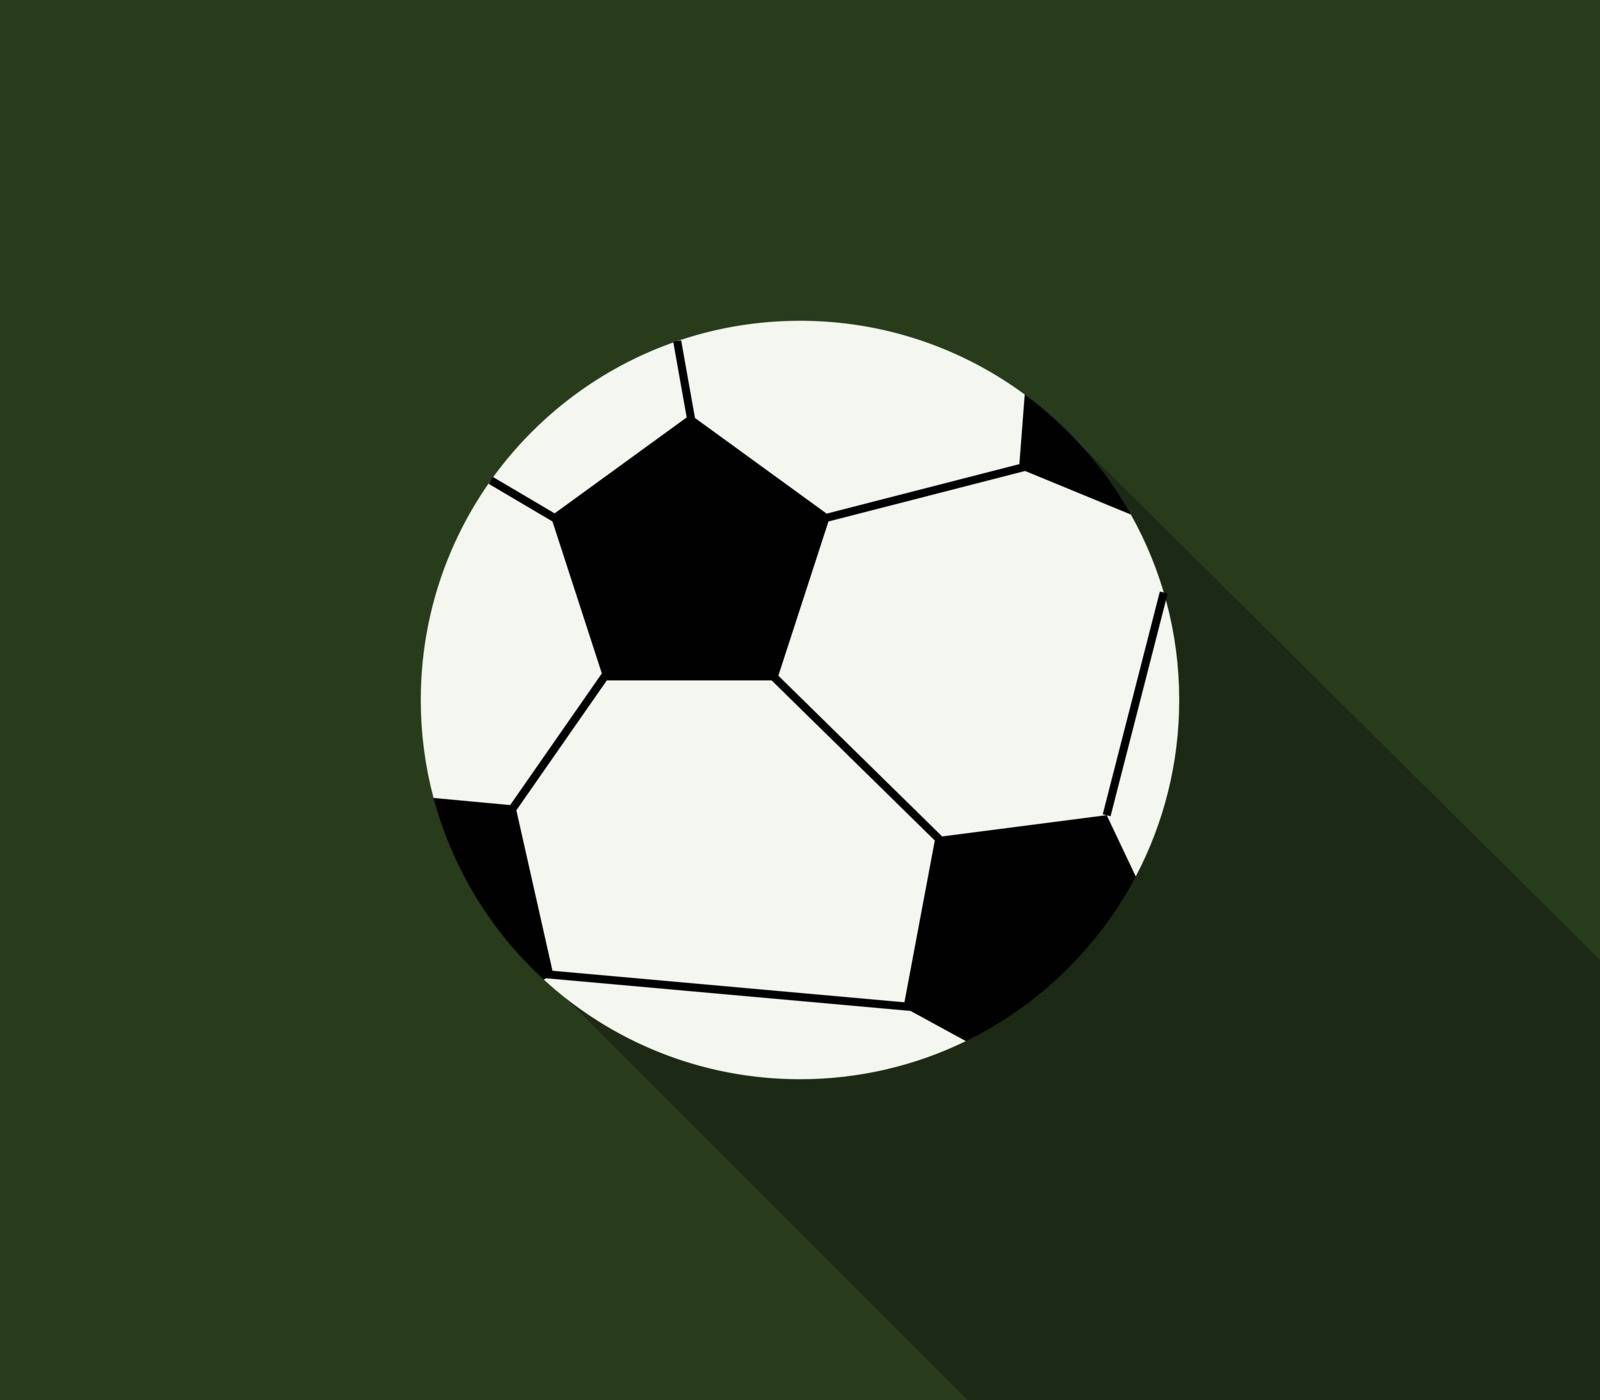 soccer ball icon by Mark1987